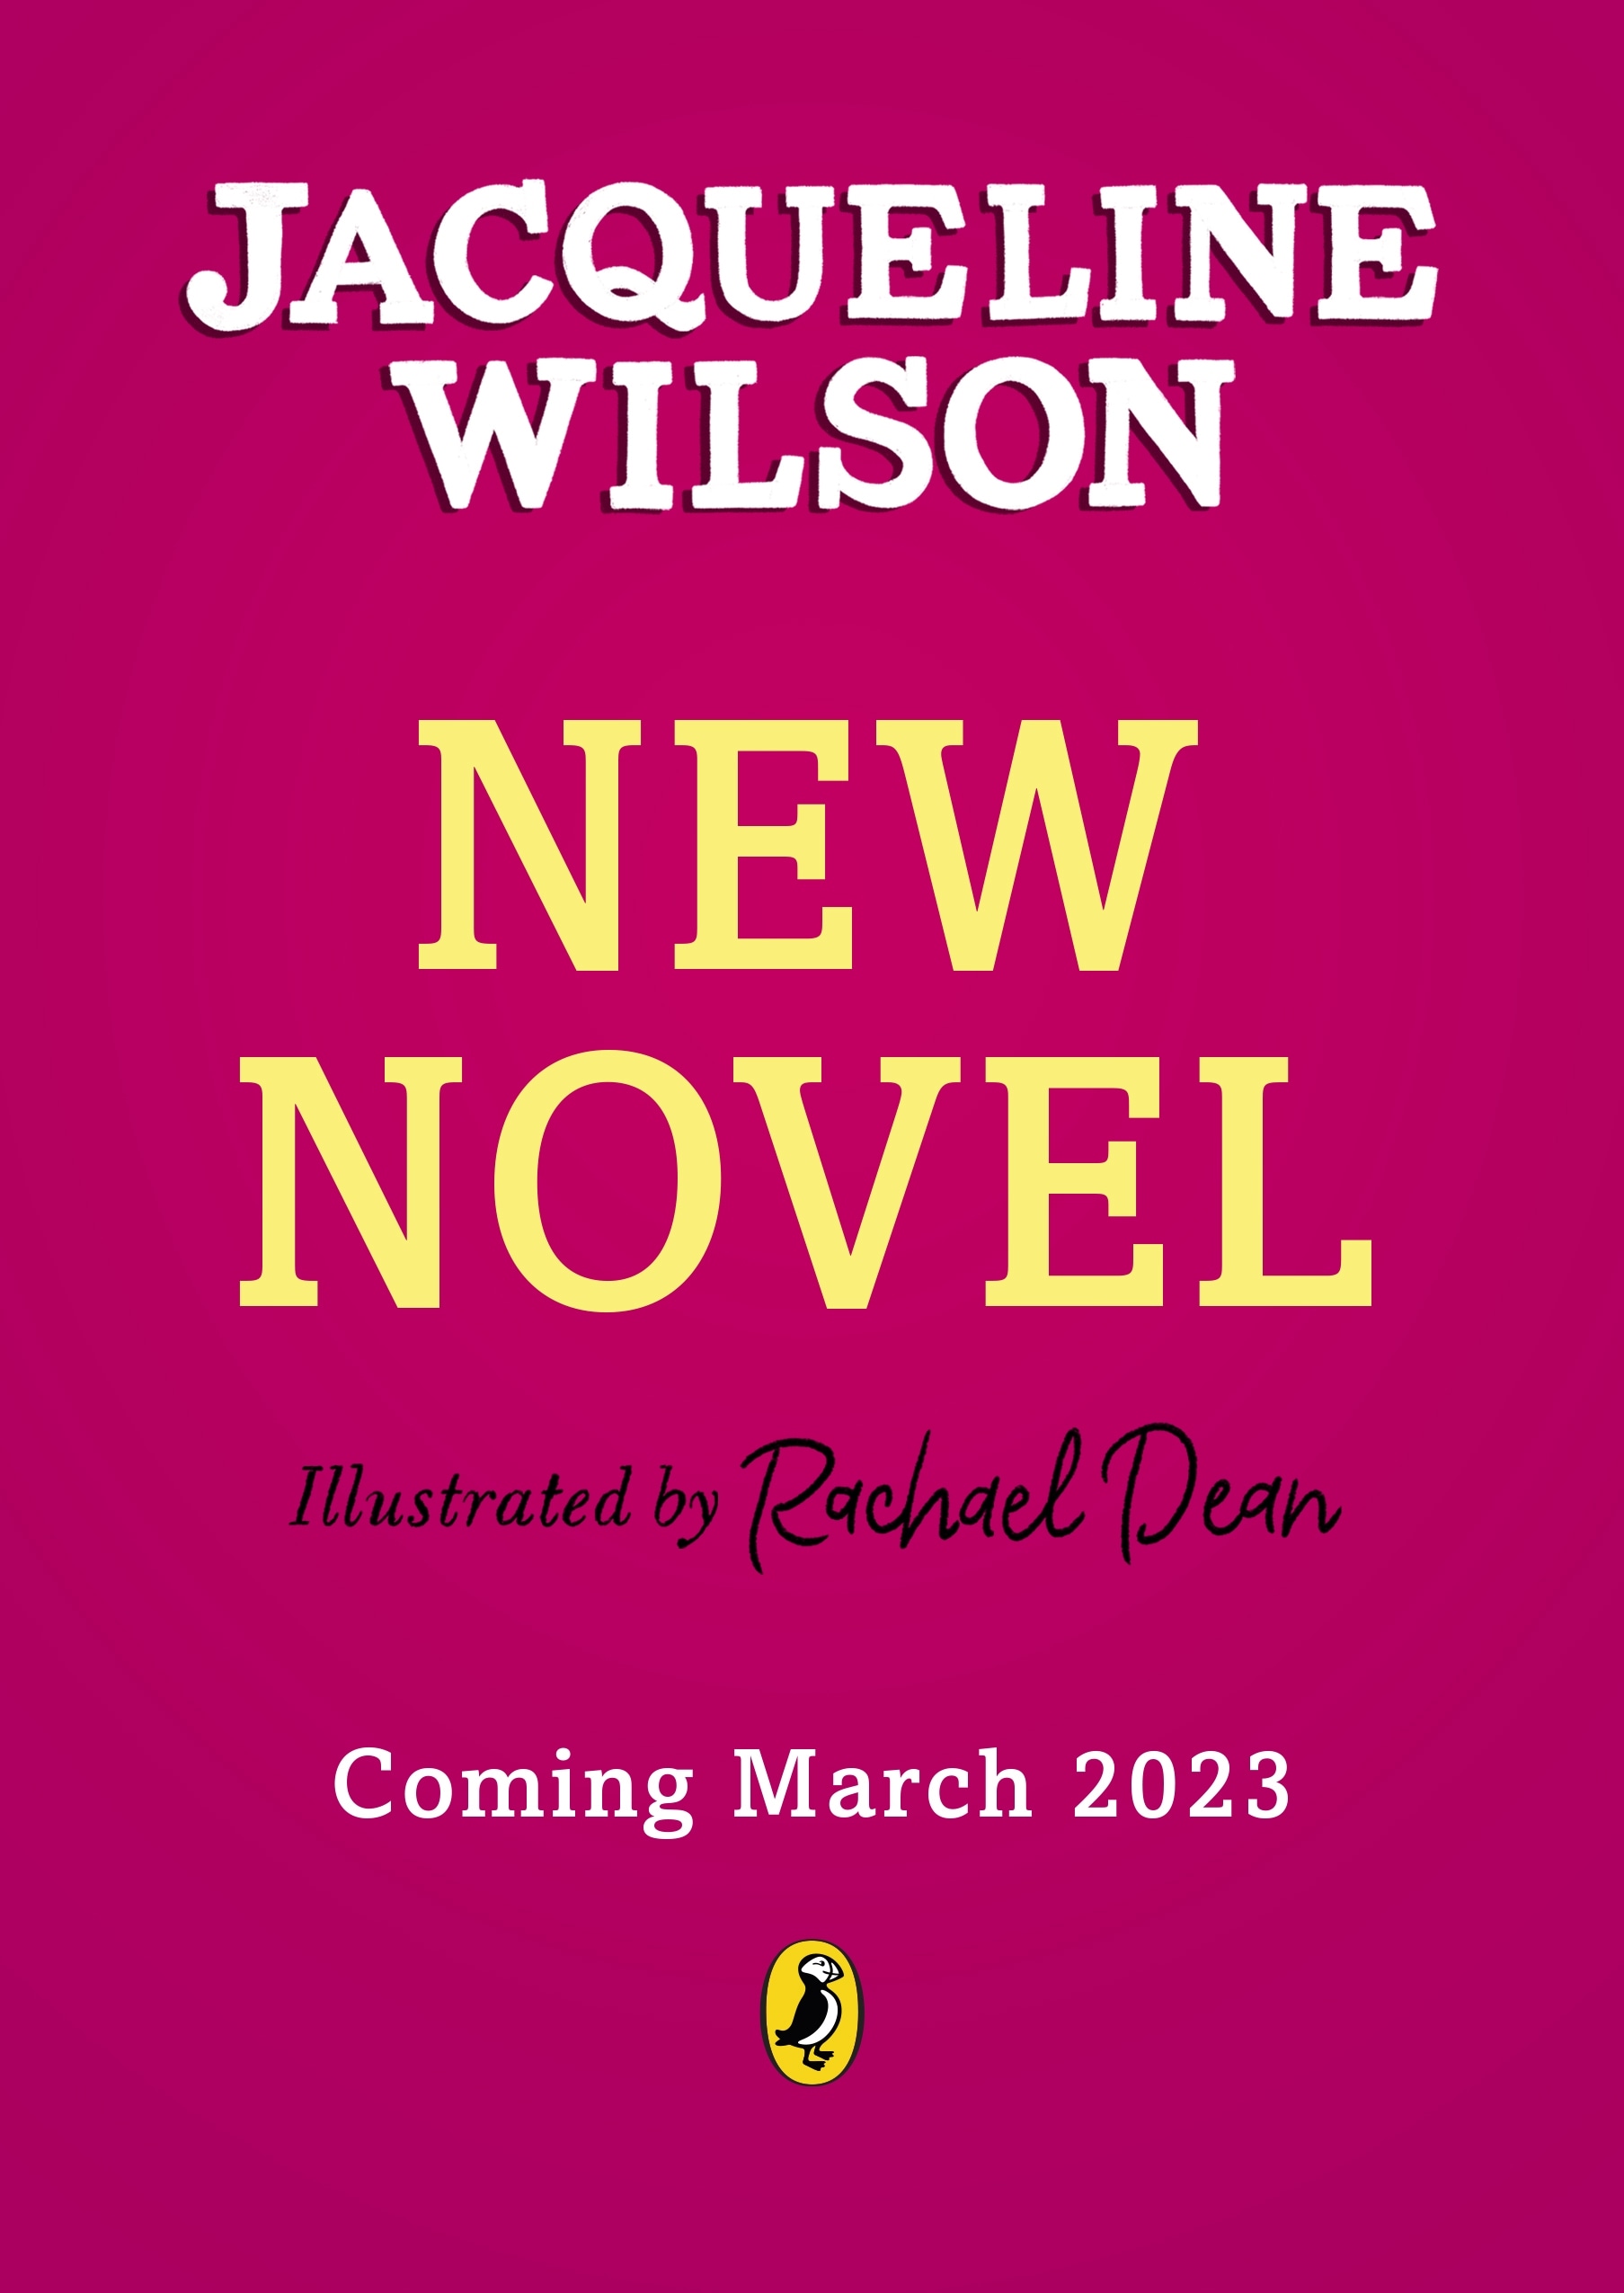 Book “New Novel” by Jacqueline Wilson — March 16, 2023